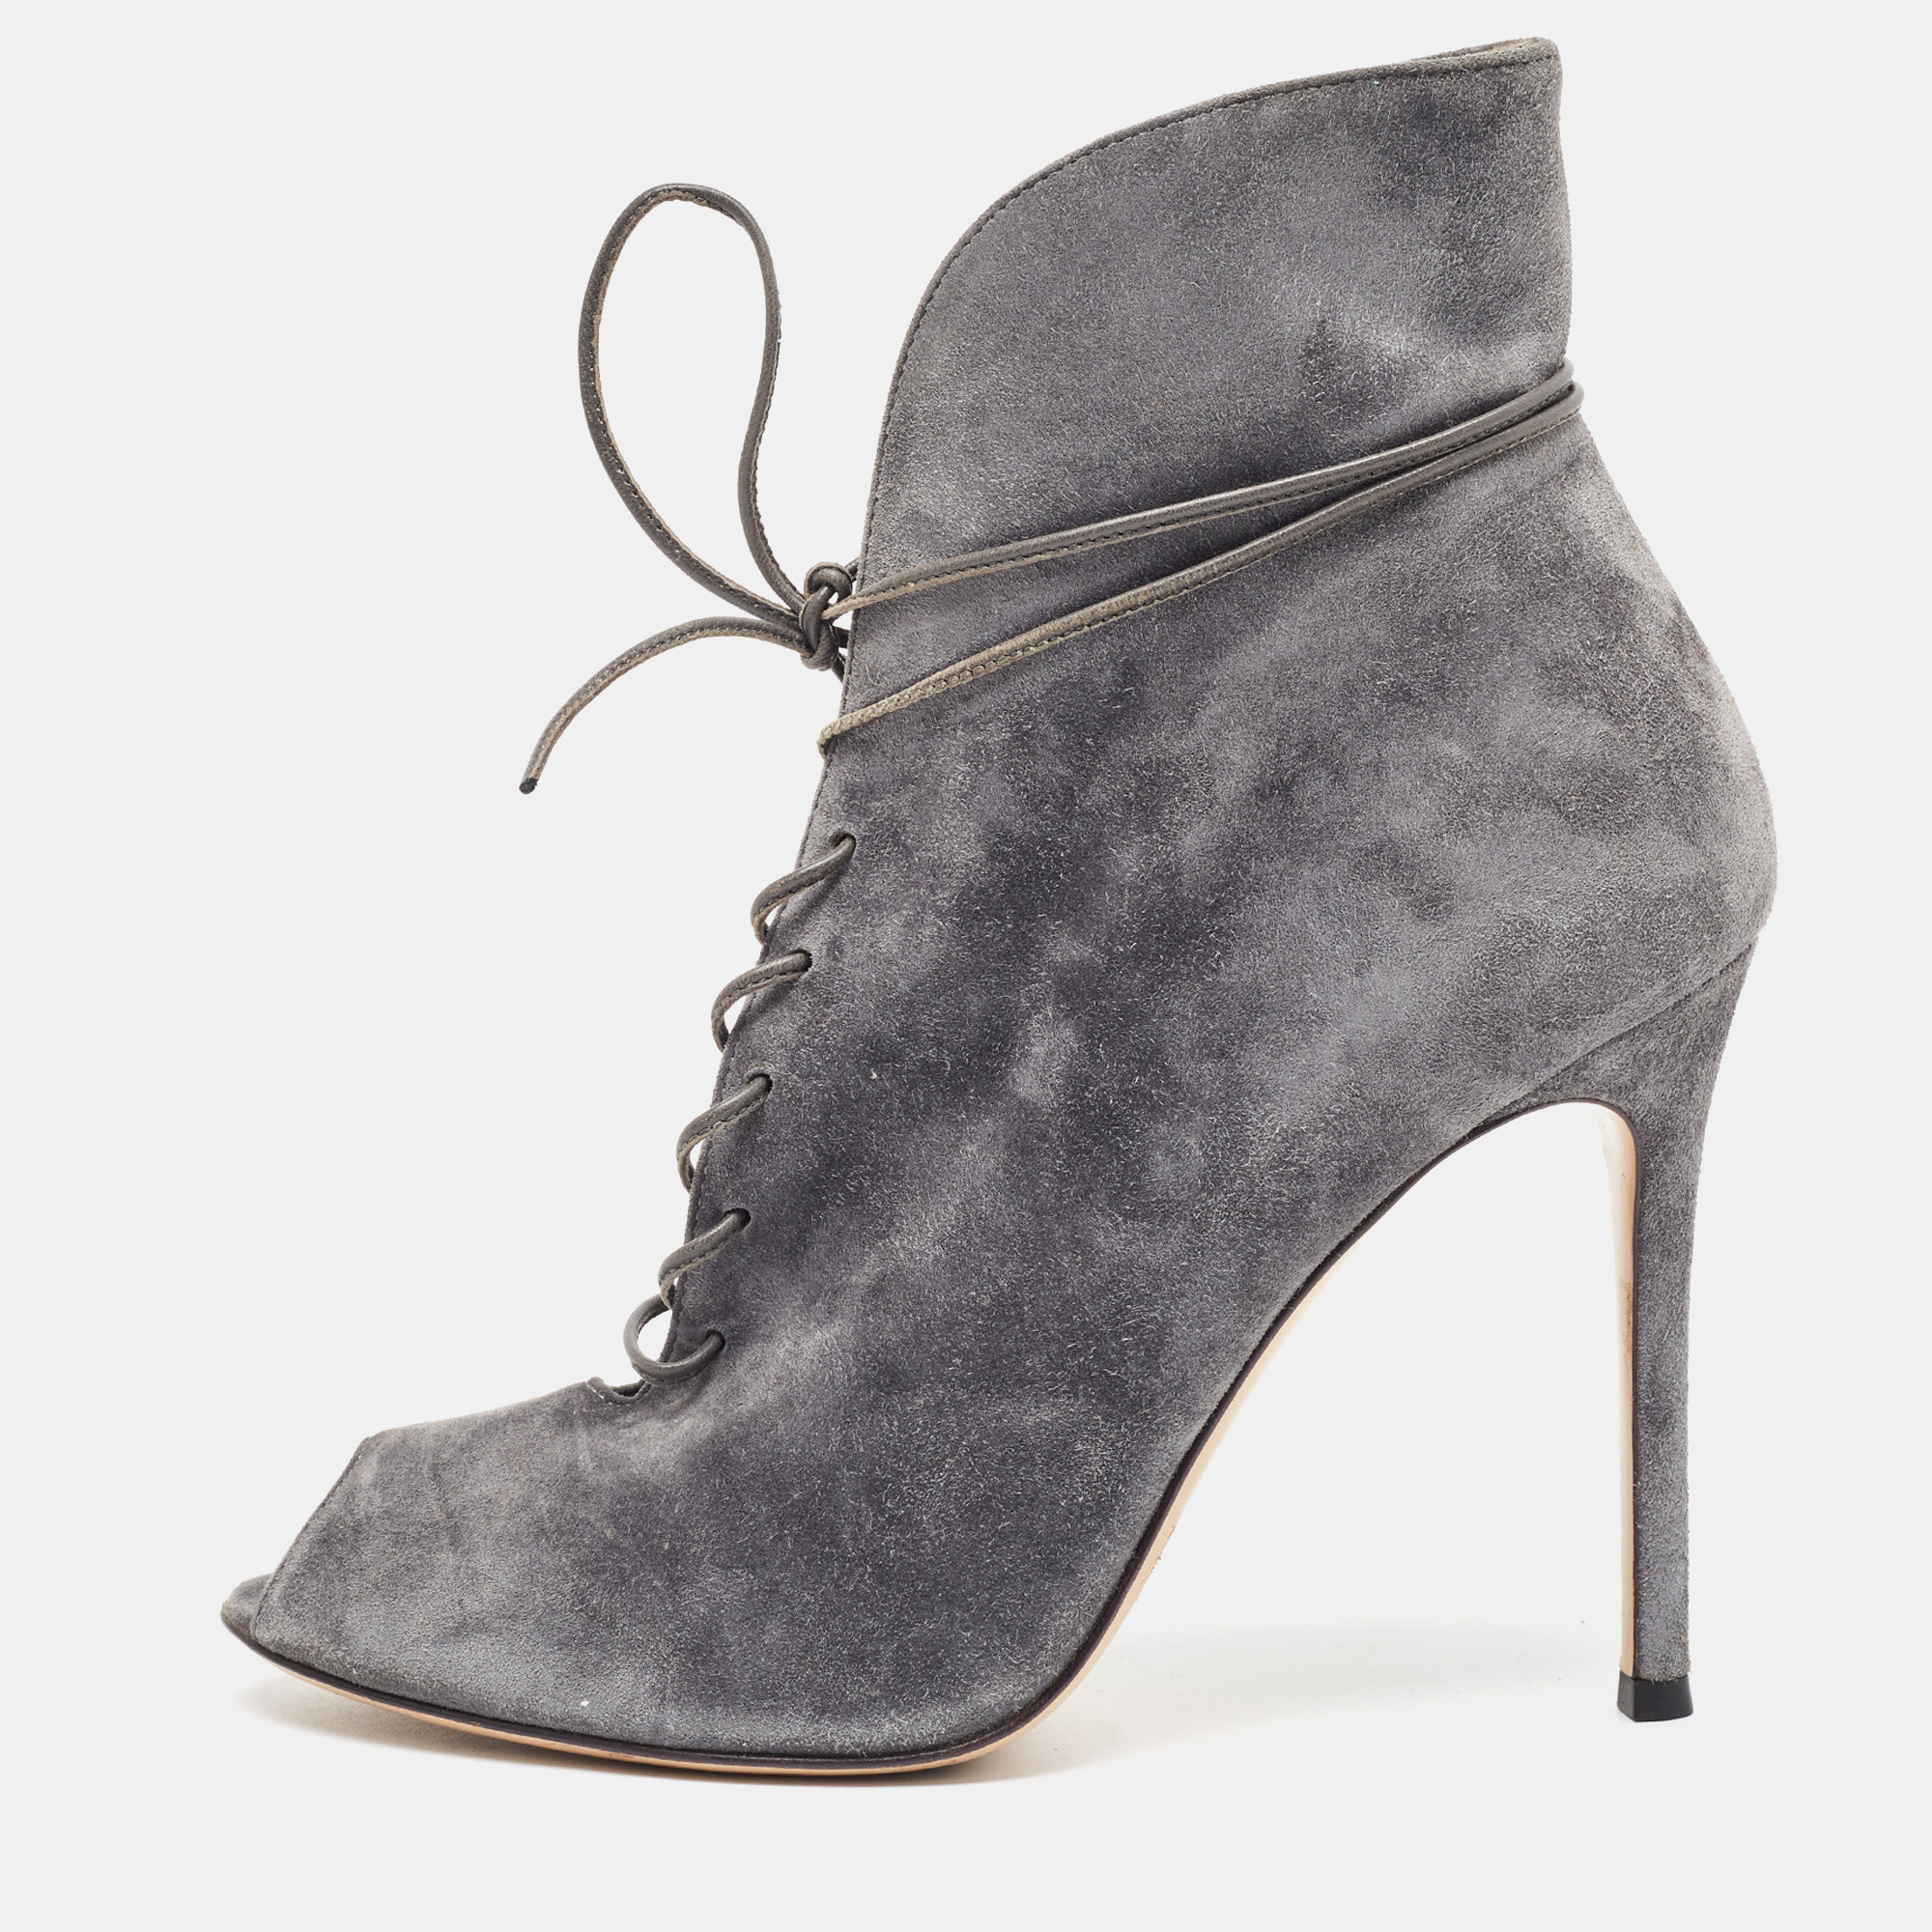 Gianvito Rossi Grey Suede Jane Ankle Booties Size 38.5